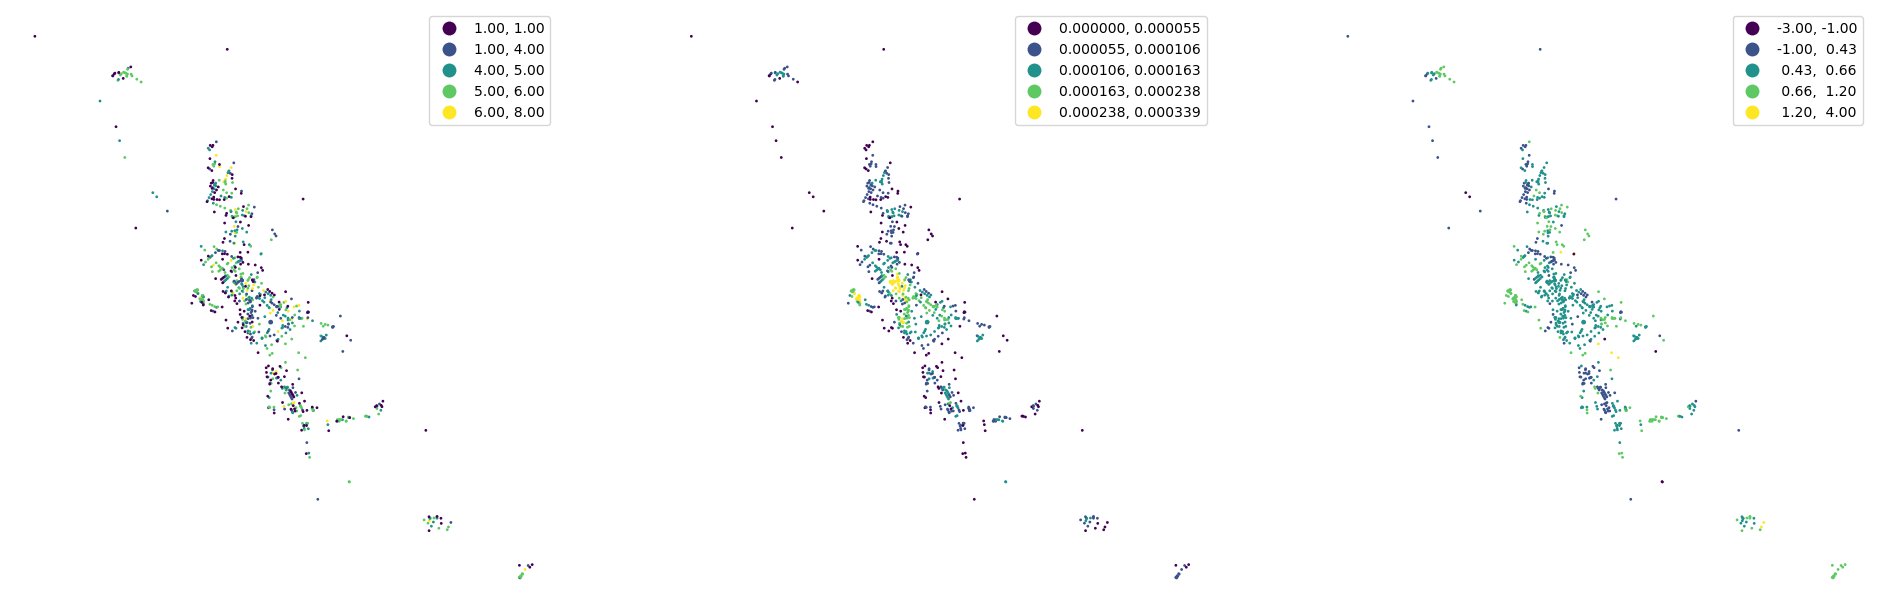 ../_images/examples_clustering_53_0.png